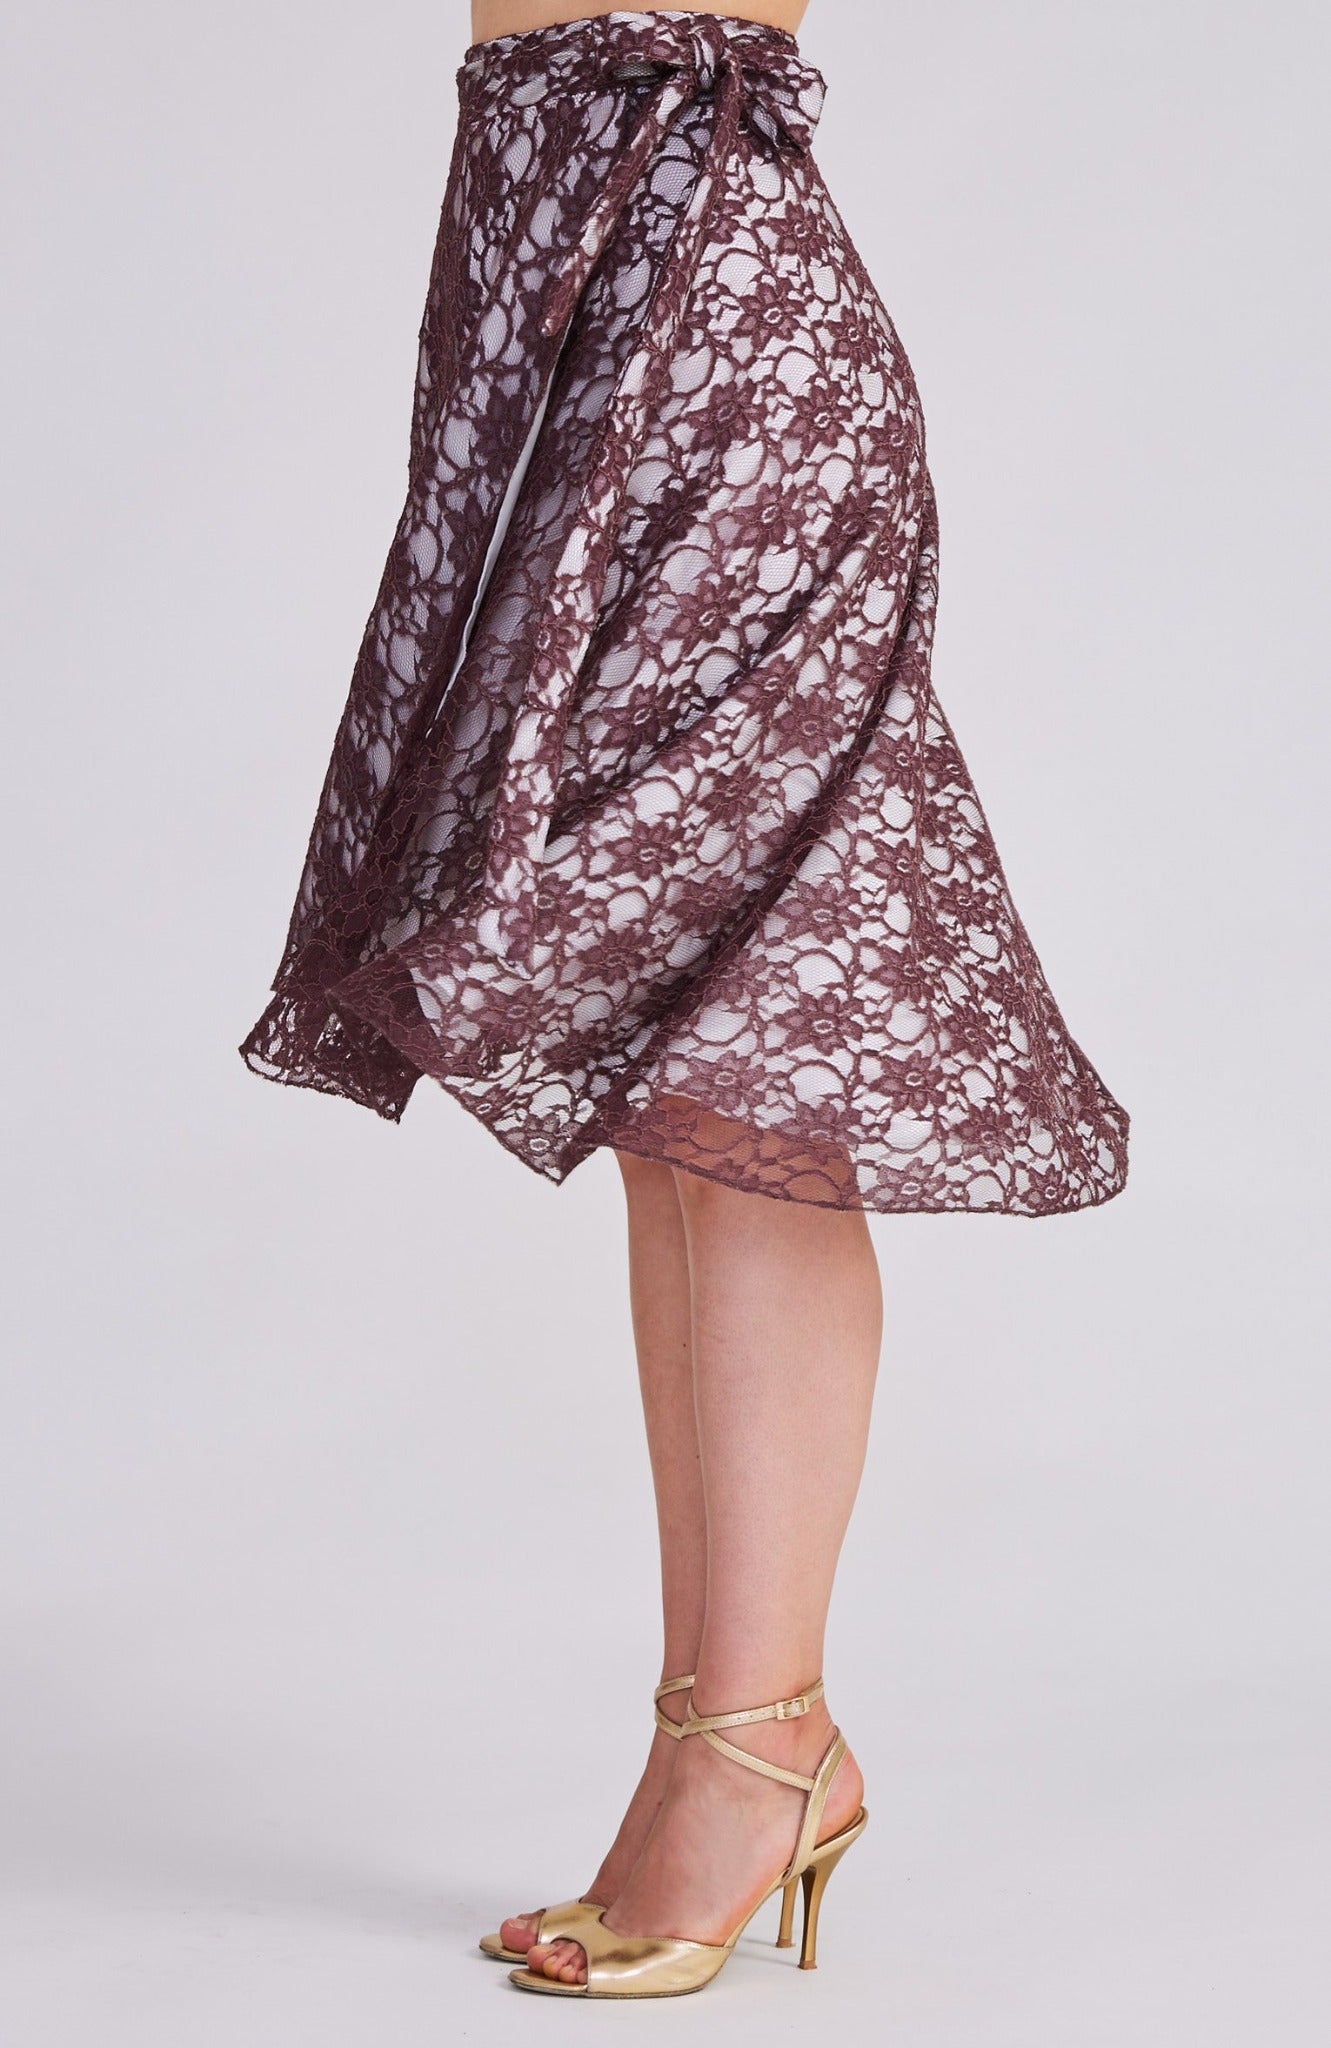 tango skirt in chocolate brown lace 